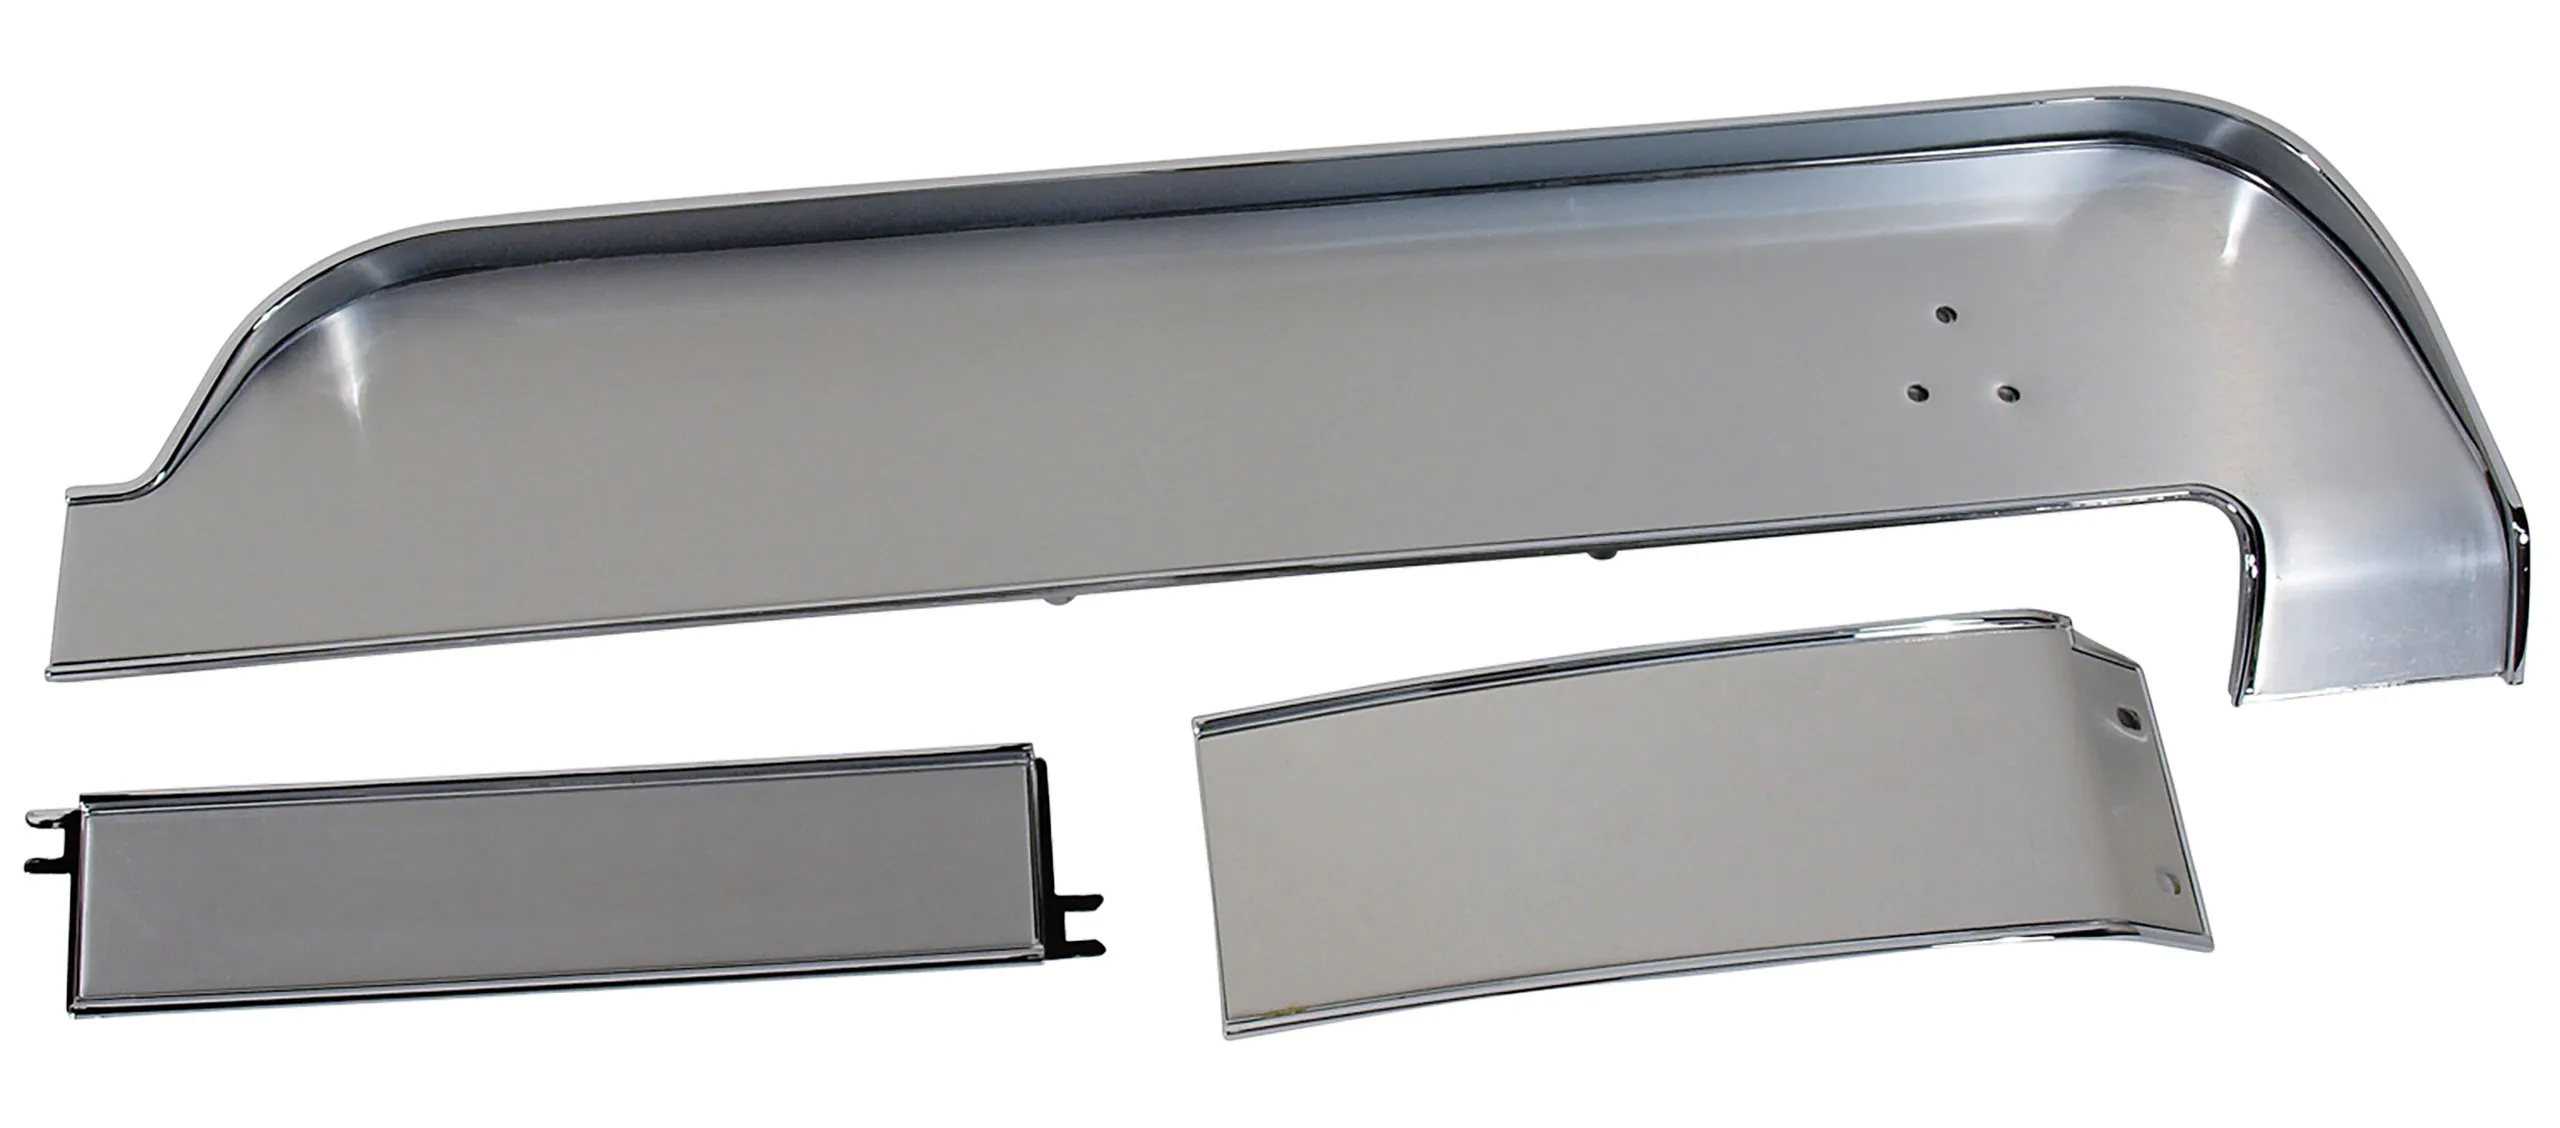 First Generation 1967 Ford Mustang Deluxe Dash Panel Trim - 3 piece Set - W/Aluminum Inserts - CA